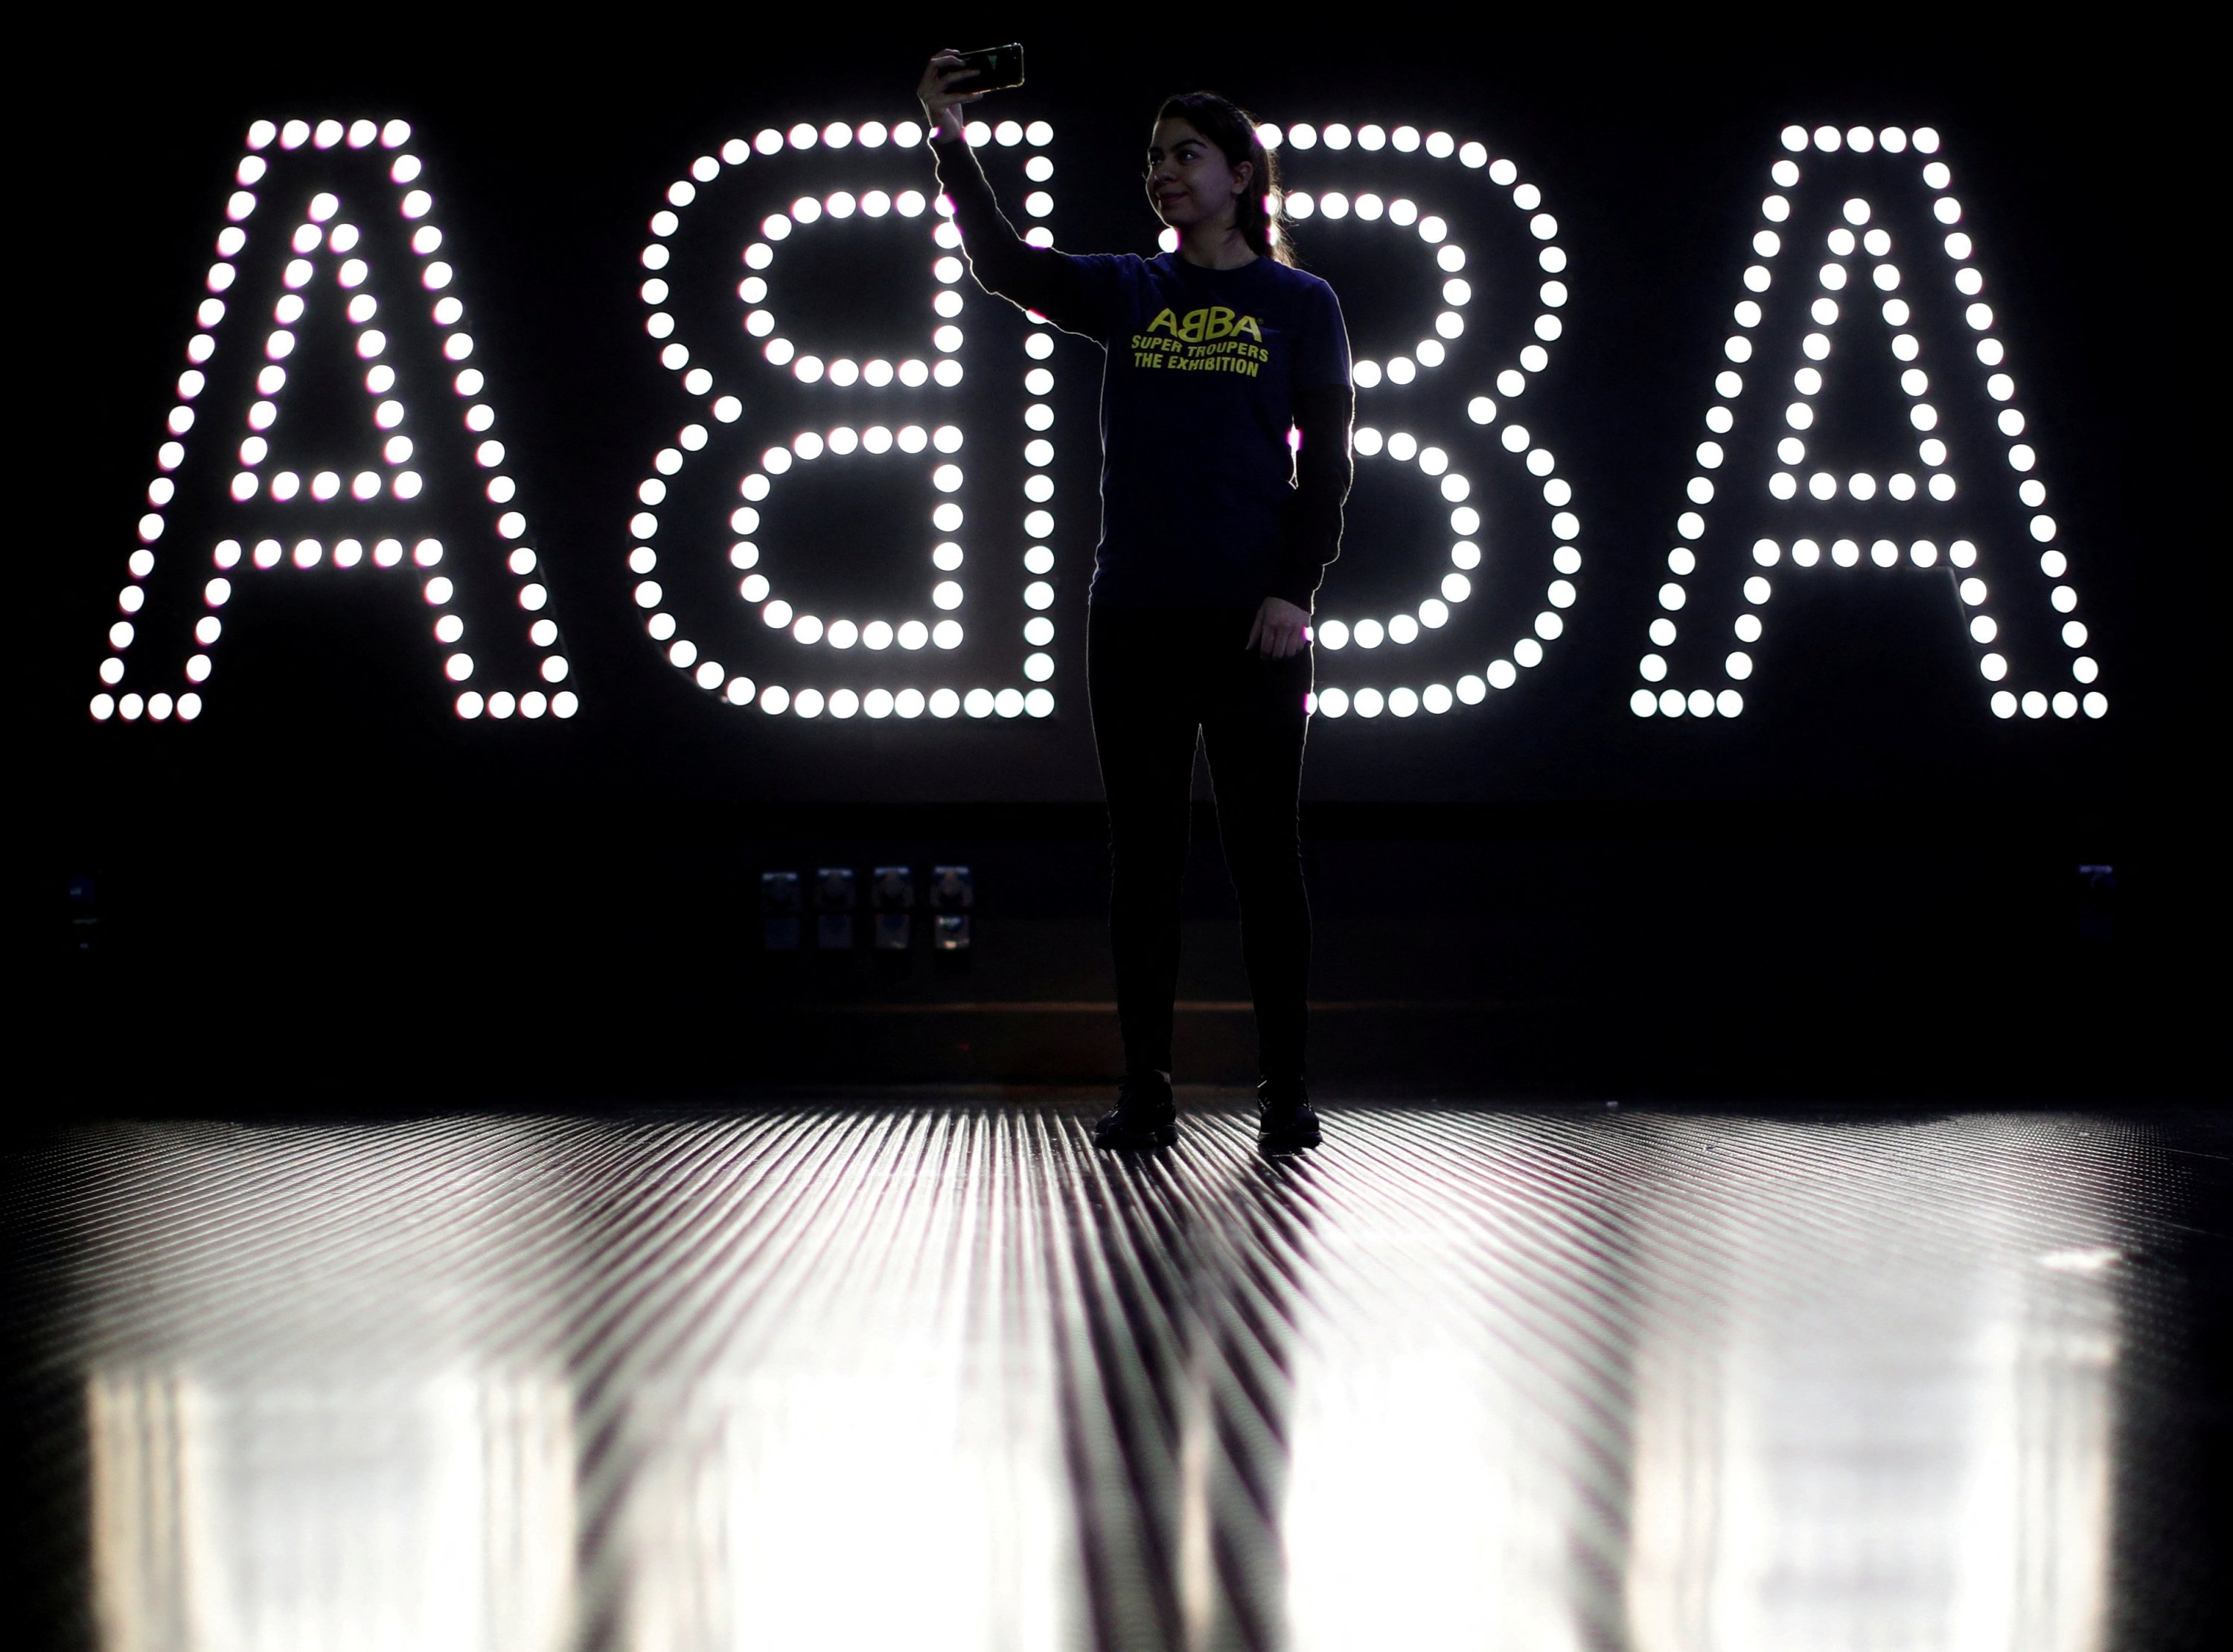 A staff member takes a selfie in front of an ABBA neon sign during the ABBA: Super Troupers The Exhibition at the O2 in London, Britain, Dec. 5, 2019. (Reuters Photo)